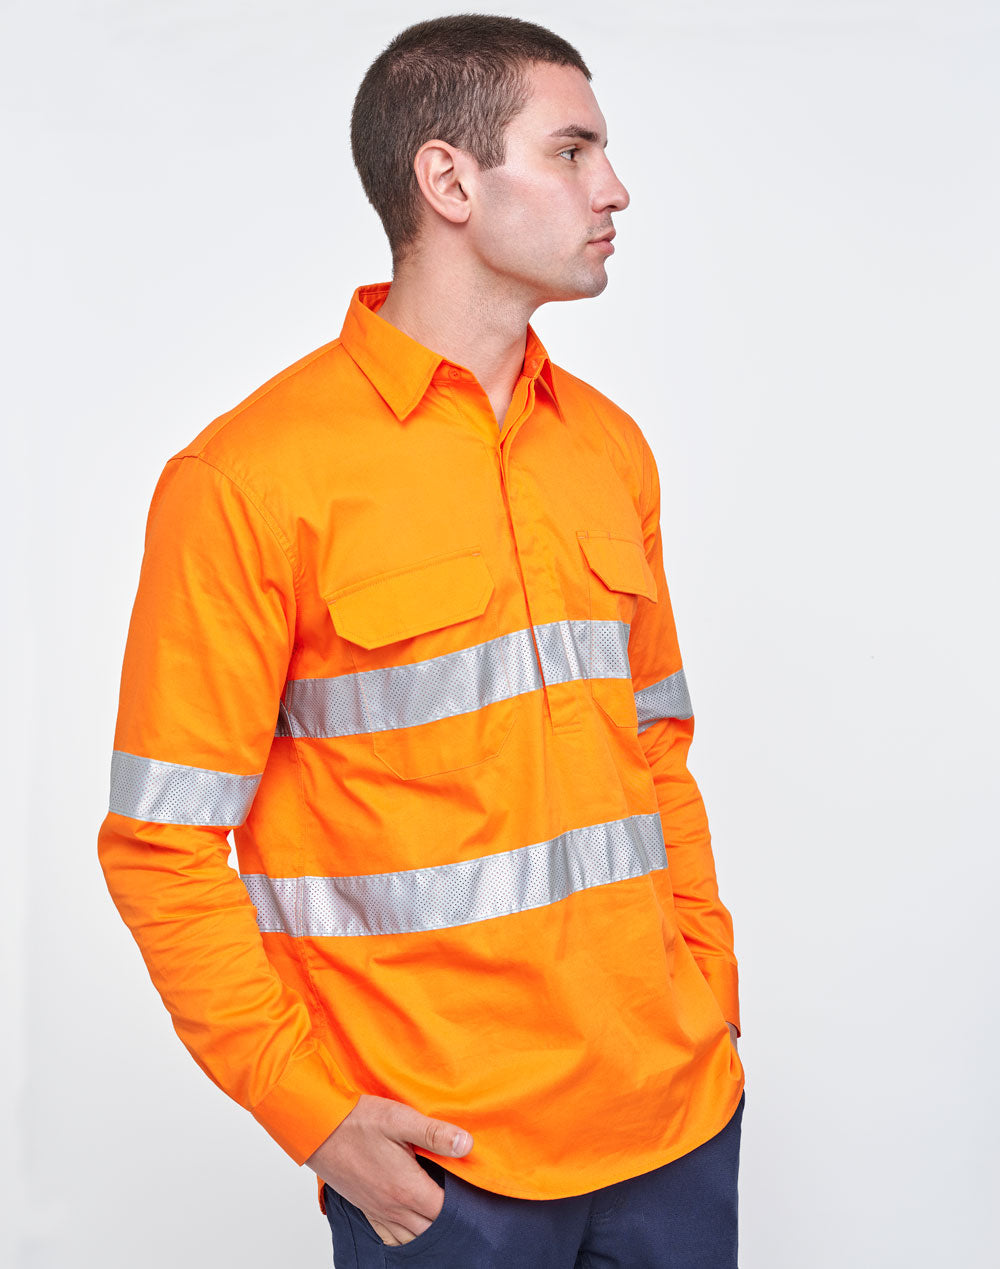 SW87 UNISEX HI-VIS COOL BREEZE CLOSED FRONT LS SHIRT WITH PERFORATED TAPE